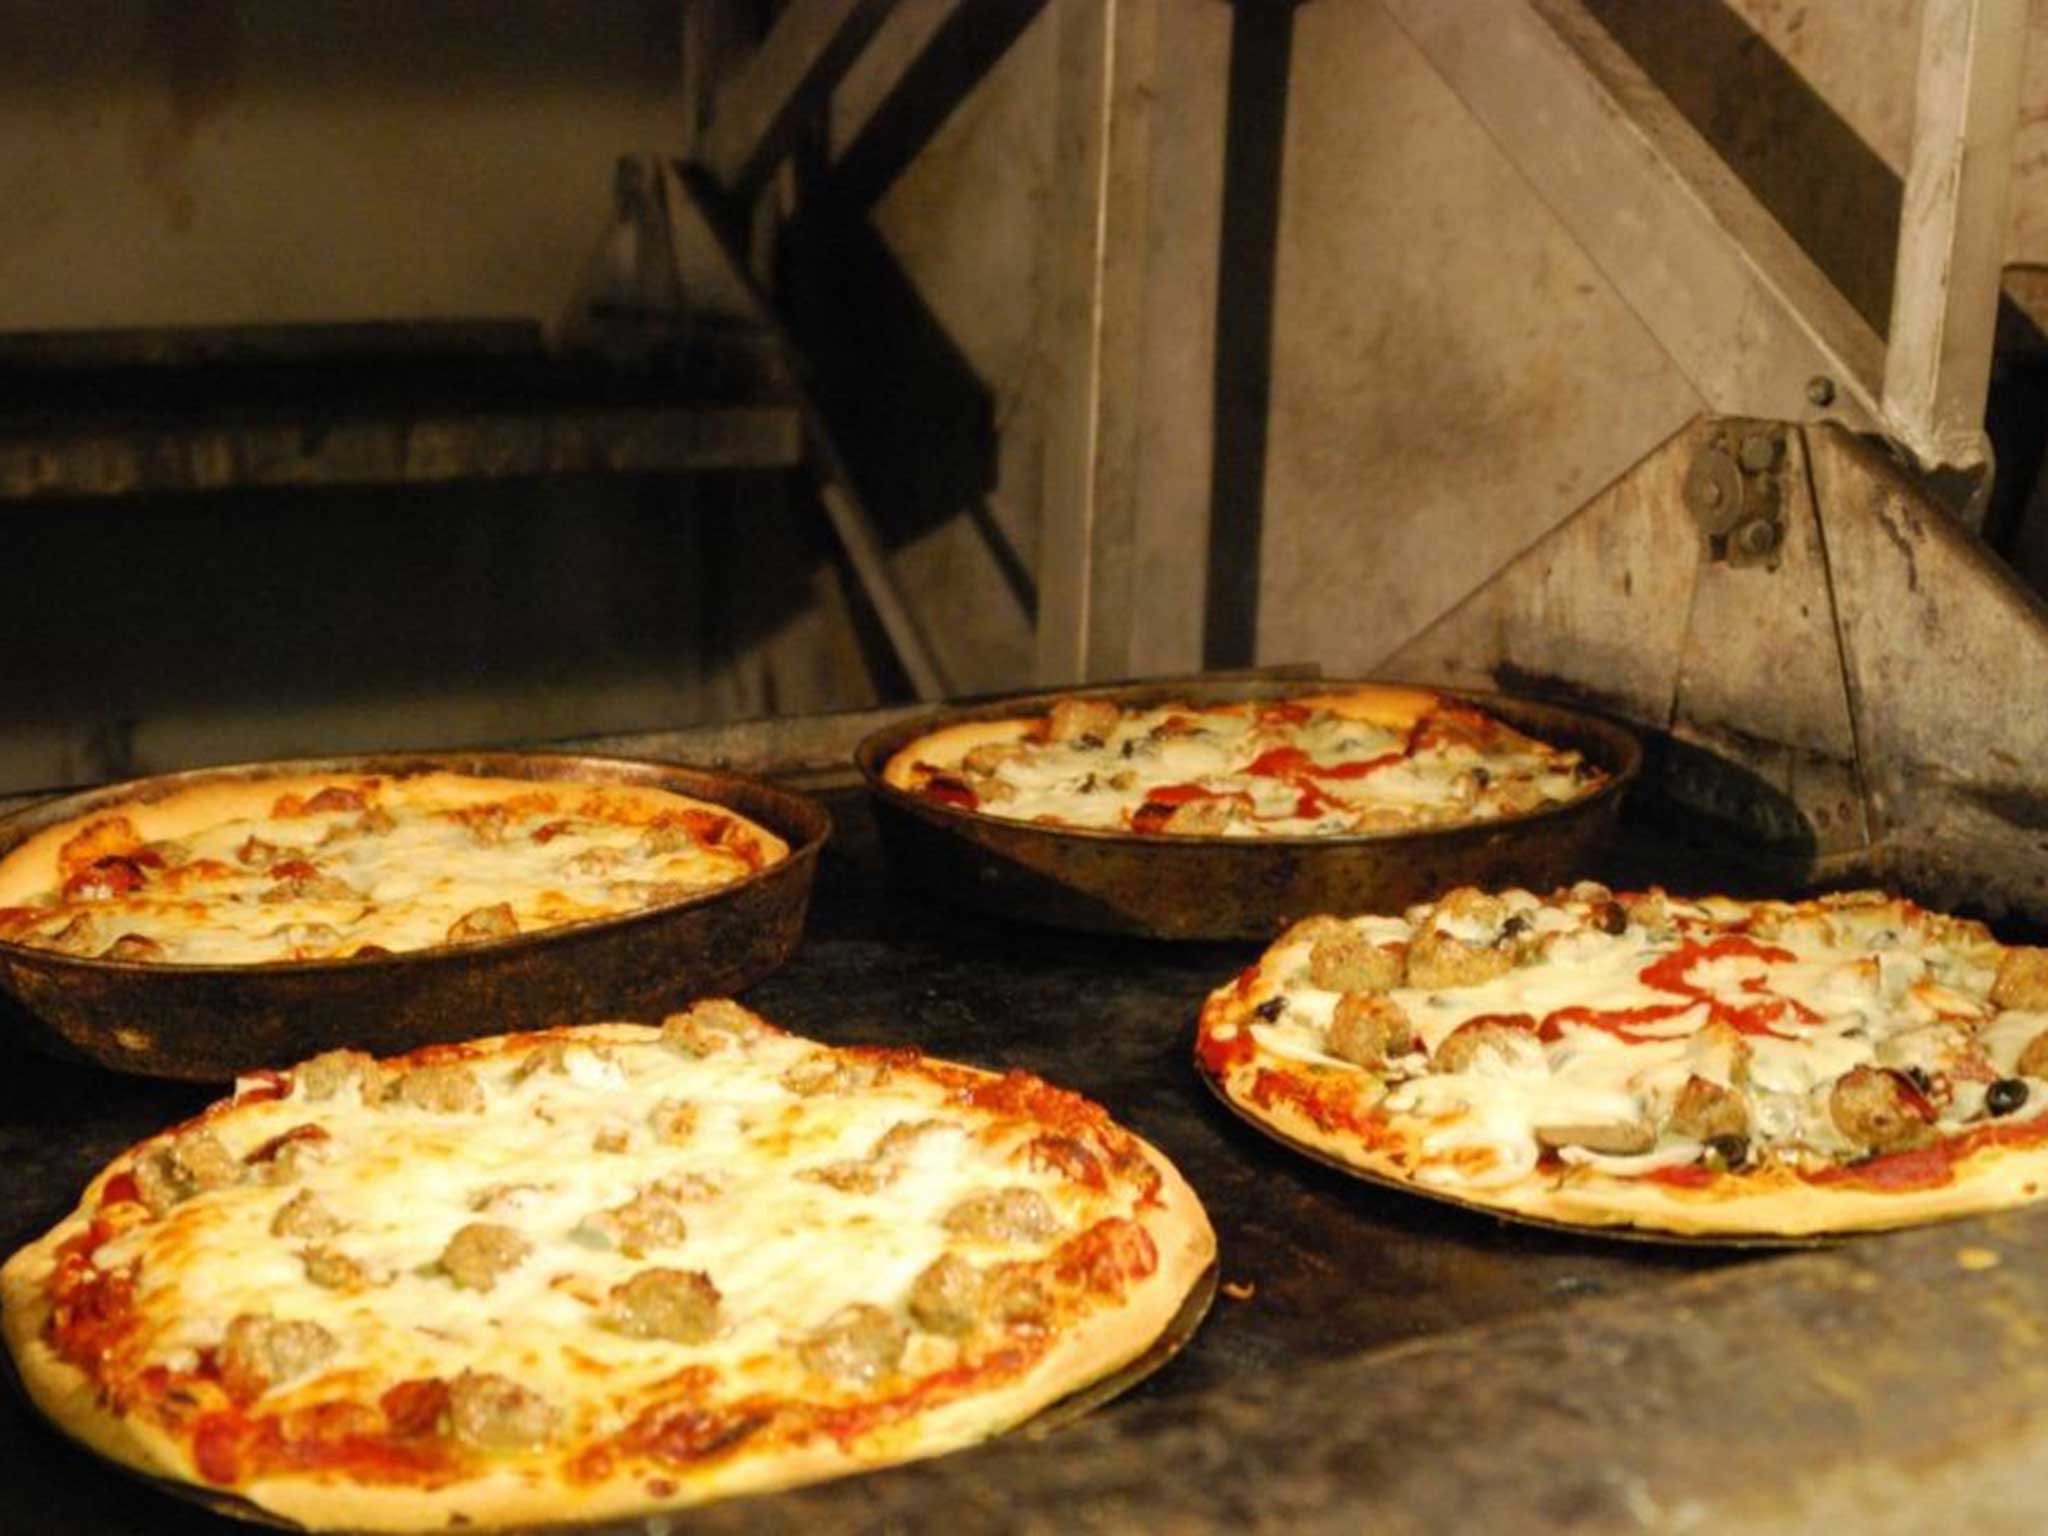 Scientists have discovered the perfect cheese for pizzas (it's mozzarella)